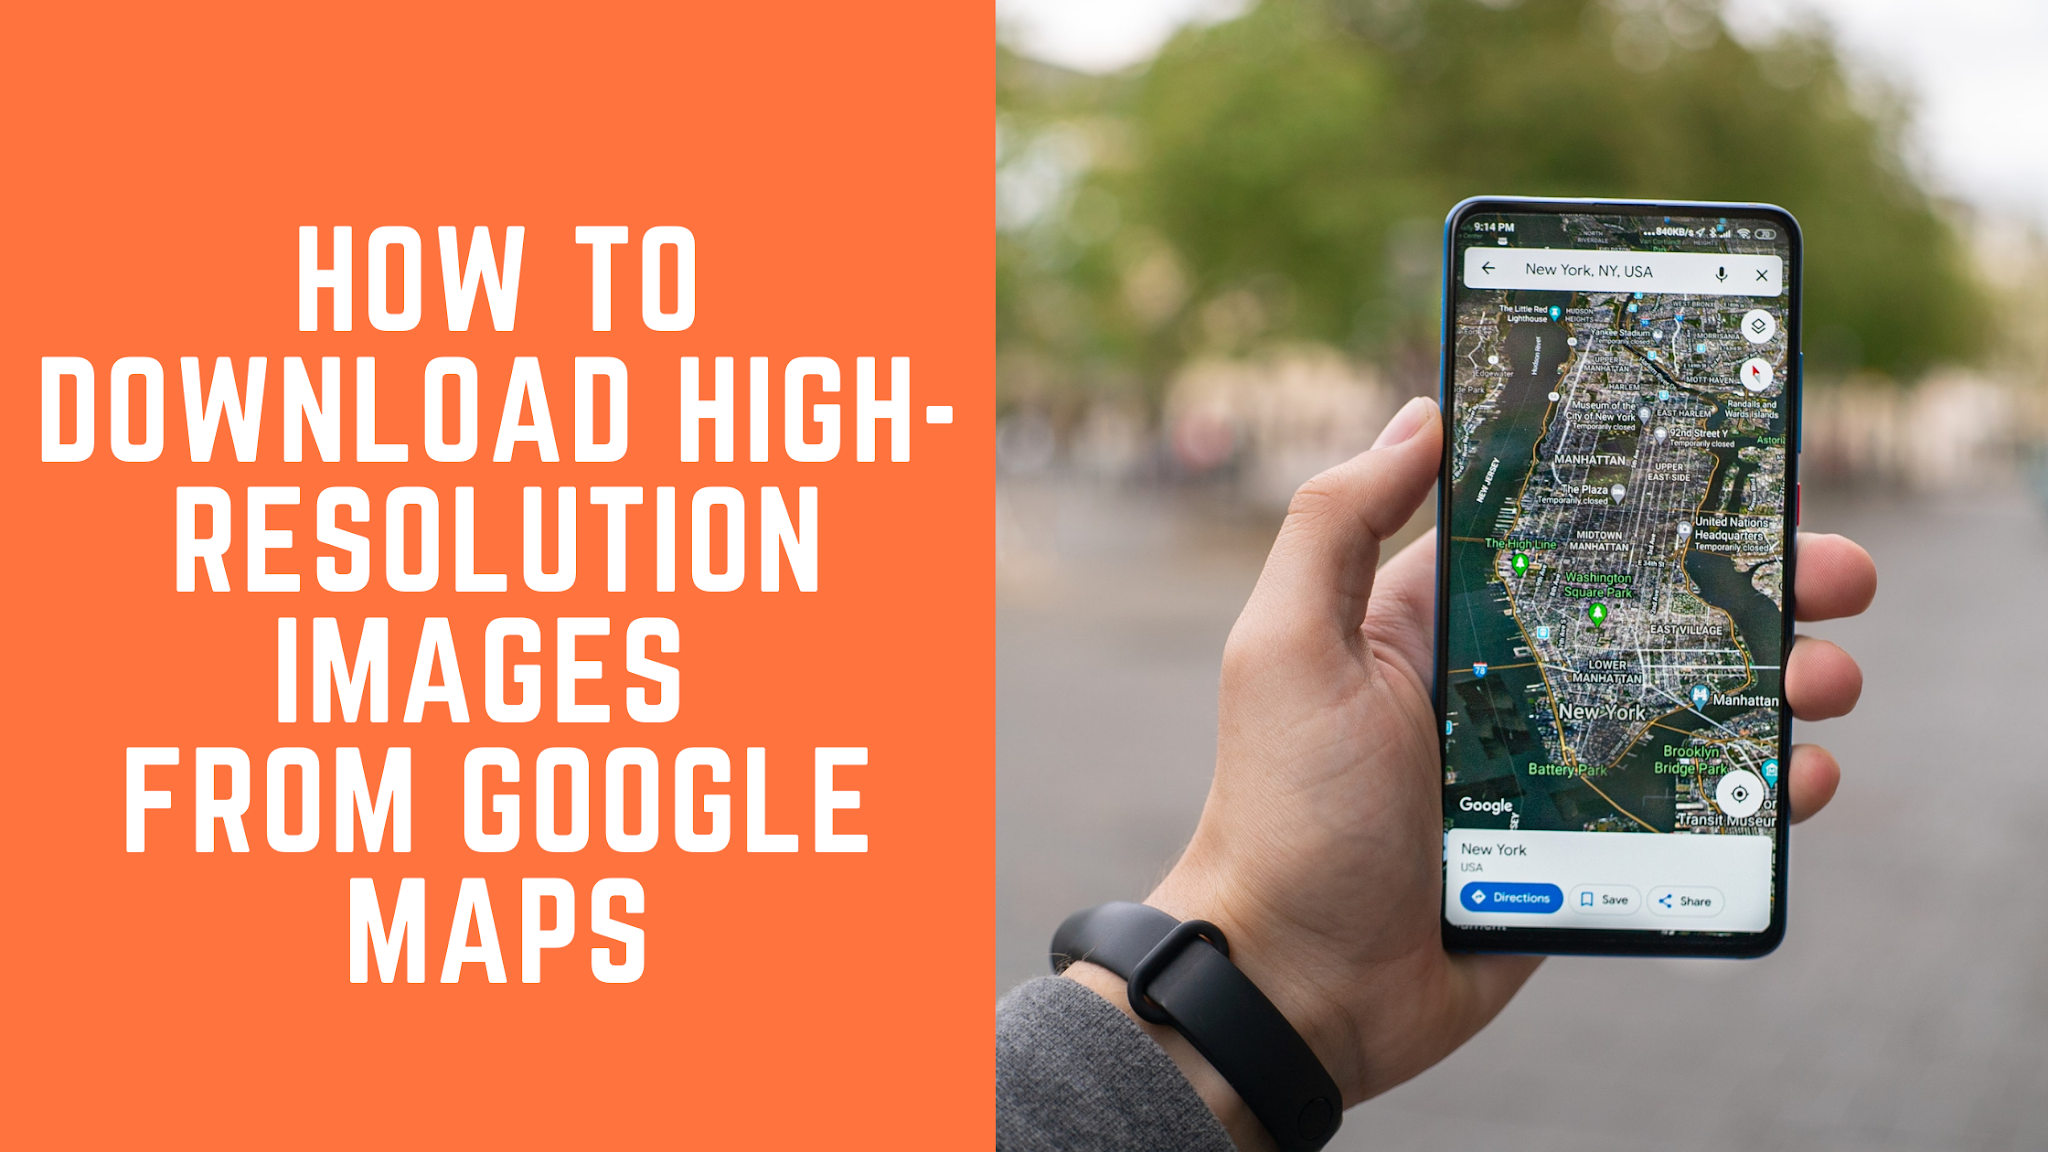 How to download High-Resolution Images from Google Maps